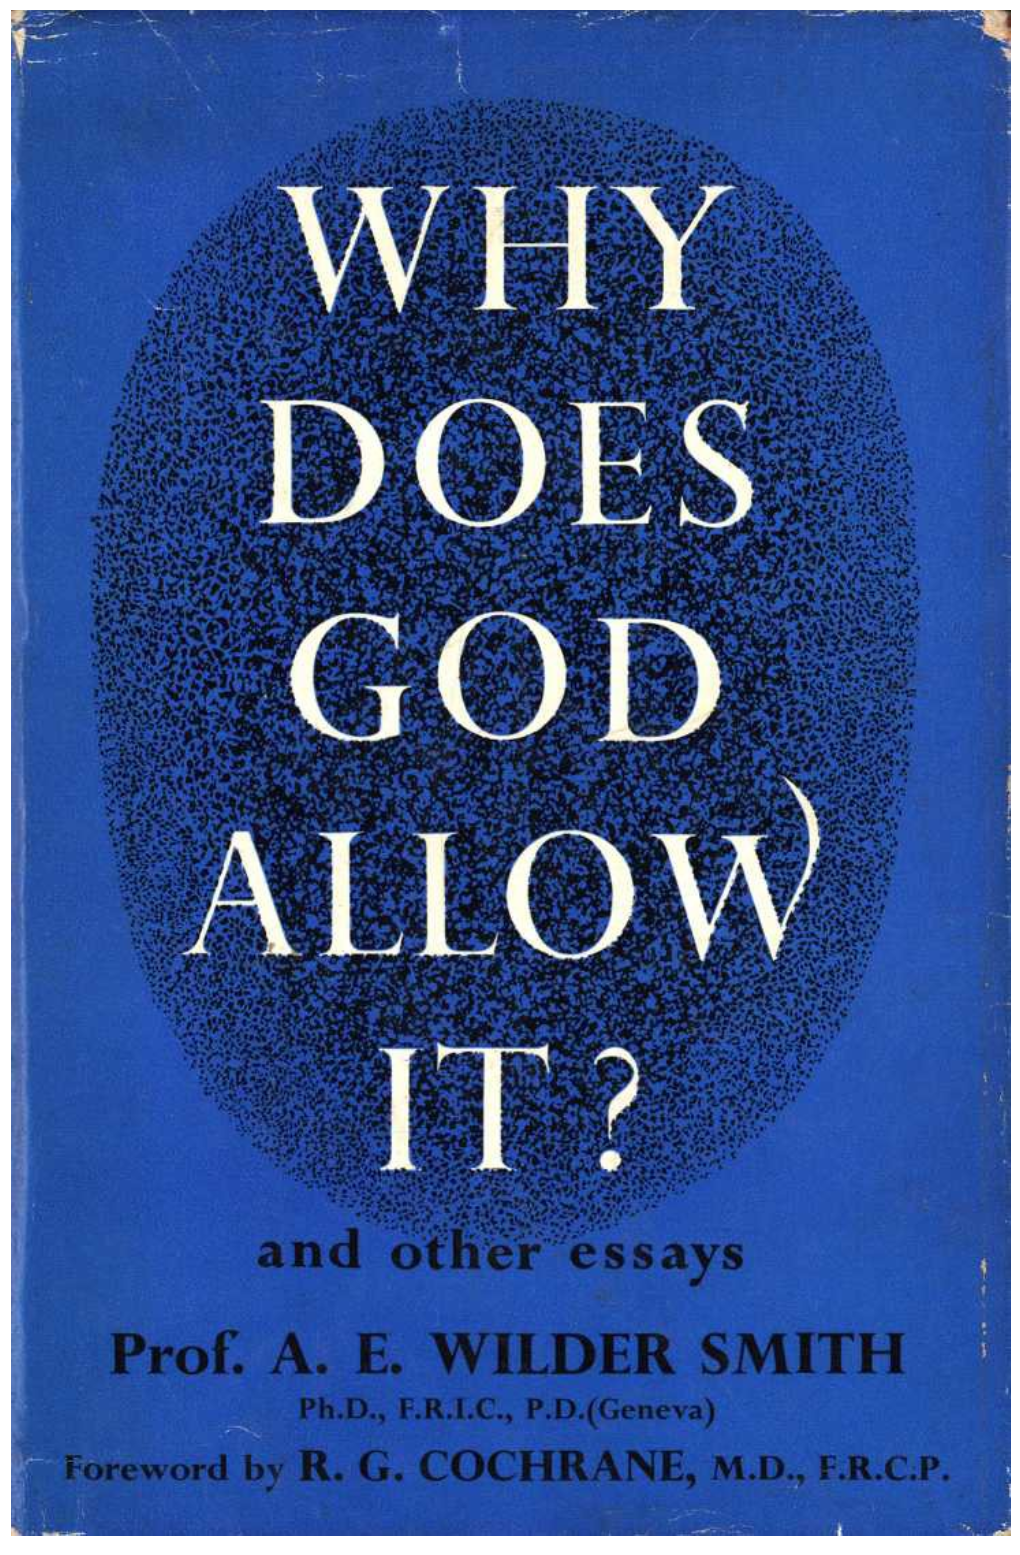 Why Does God Allow It?